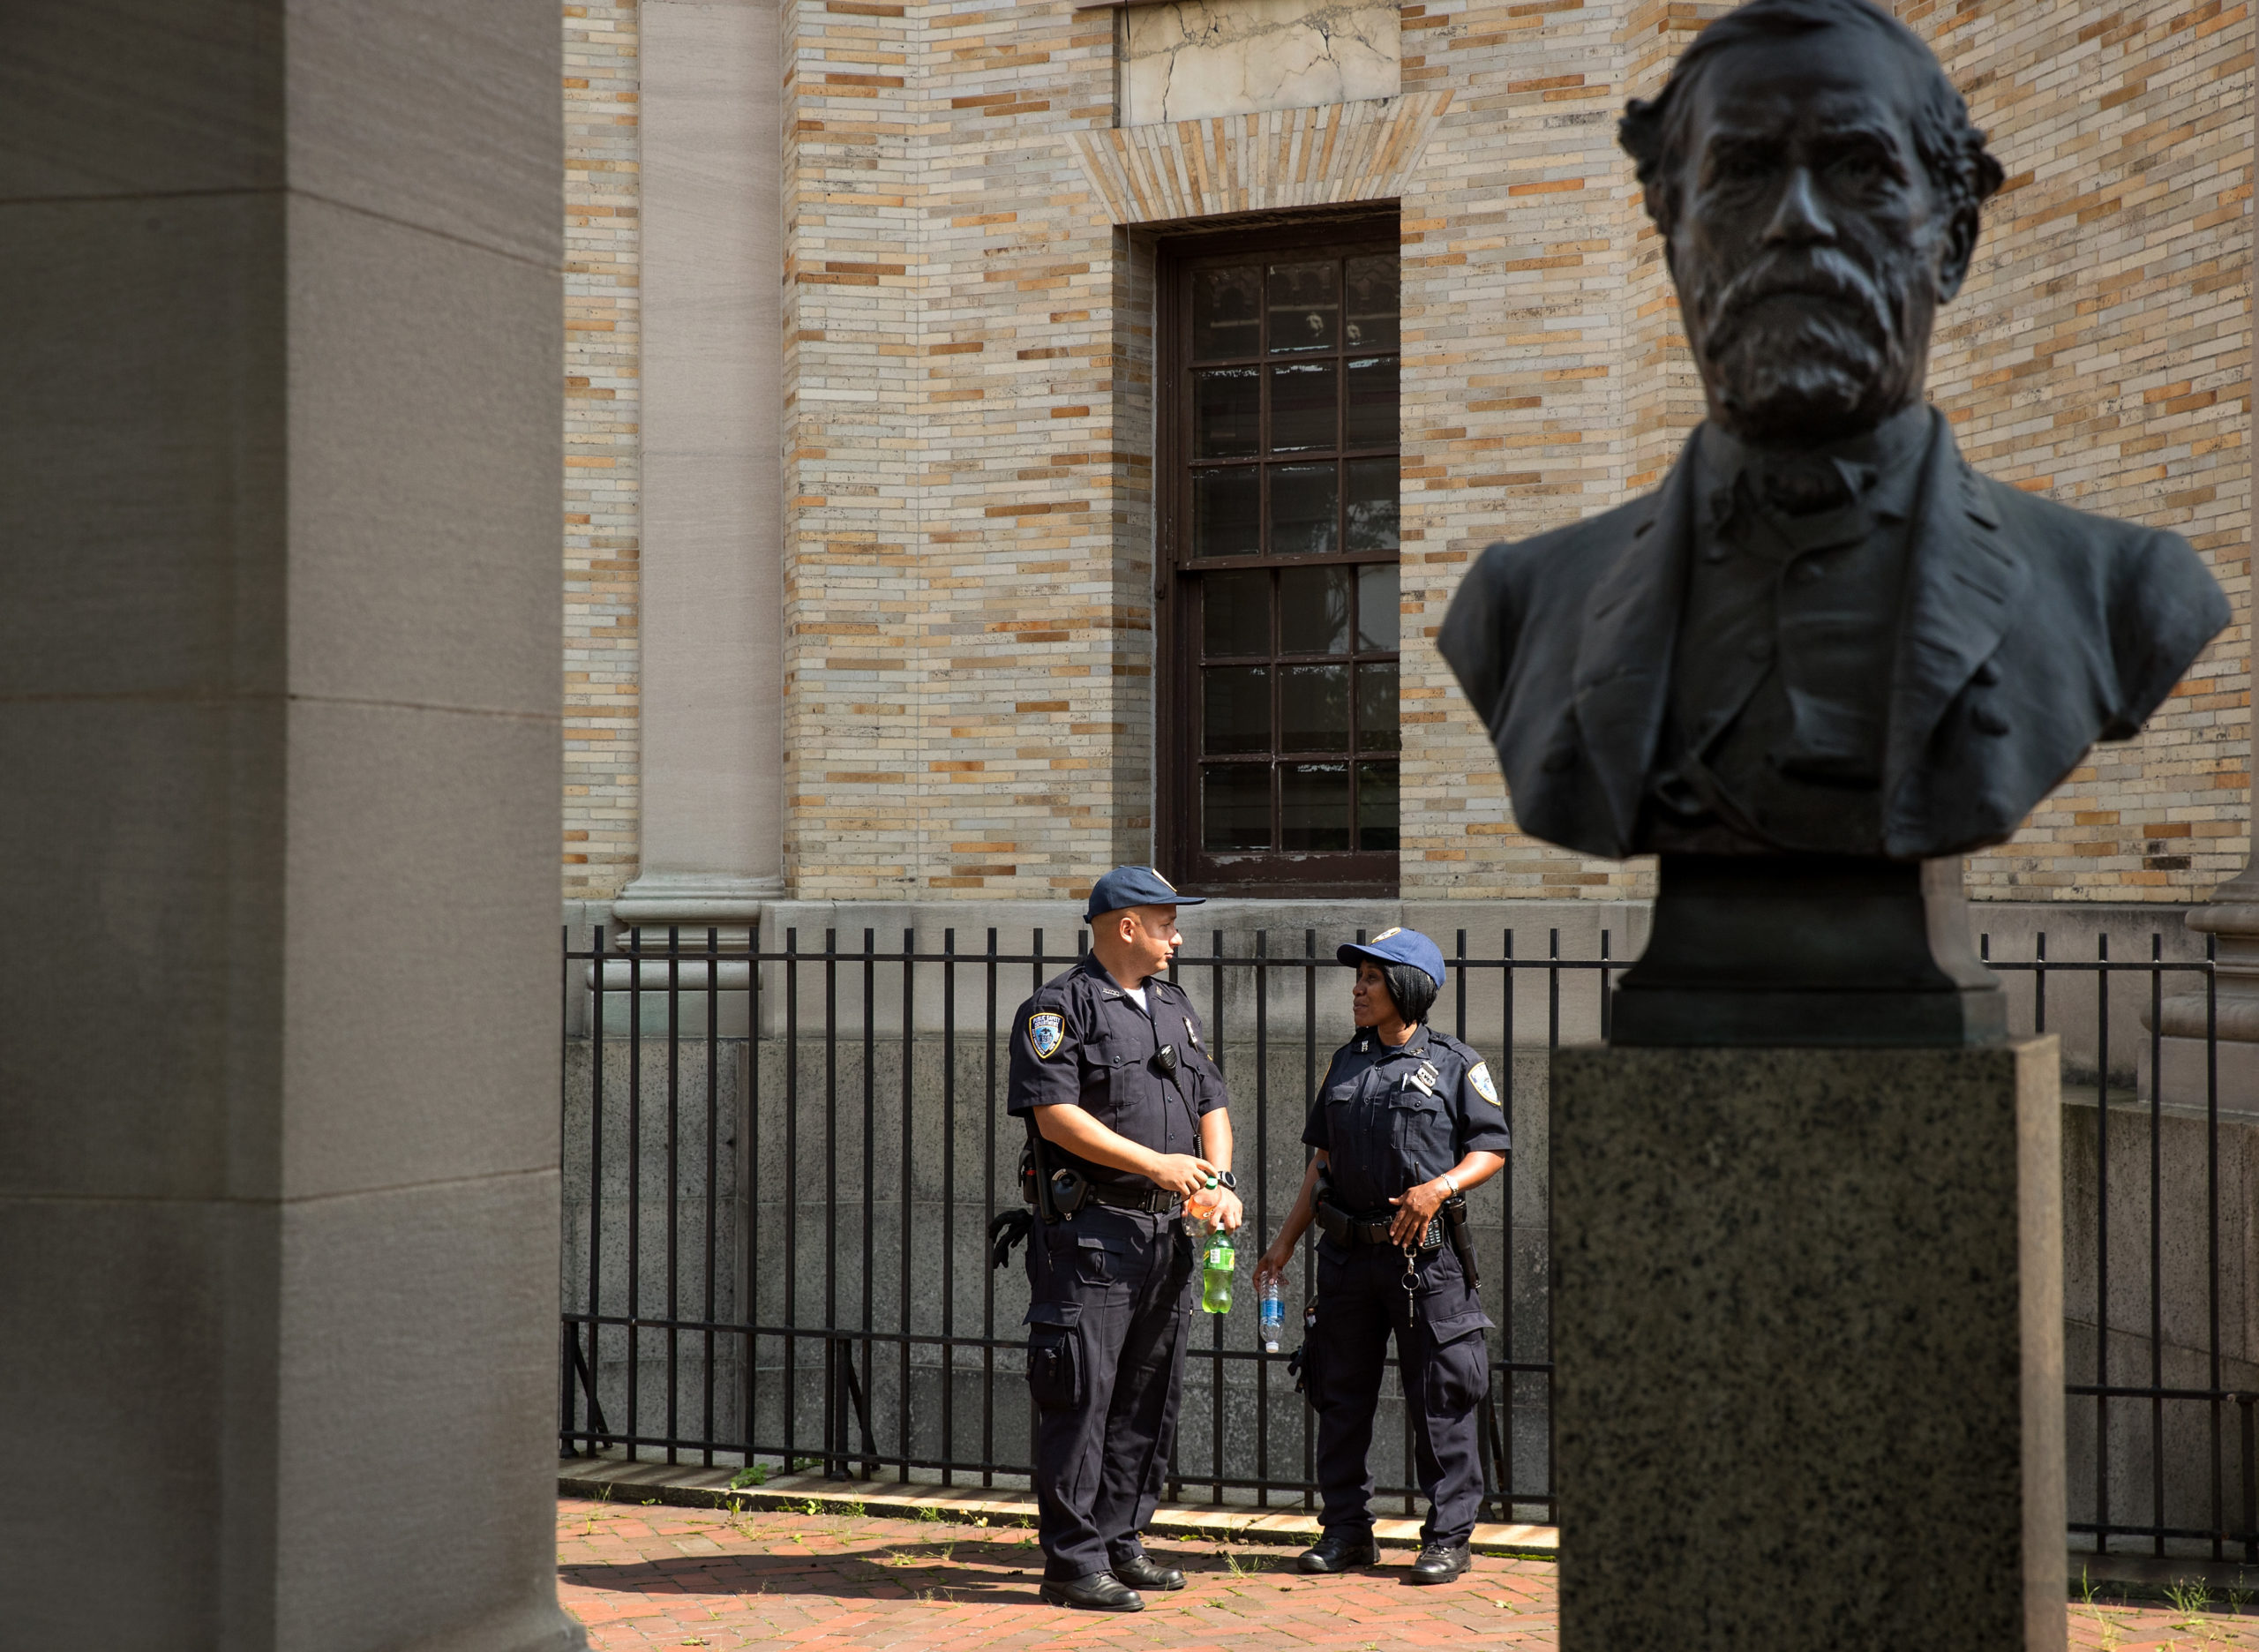 Two City University of New York Public Safety Department officers stand and monitor the area around a bust of Robert E. Lee as it stands in the 'Hall of Fame for Great Americans' on the campus of Bronx Community College, August 17, 2017 in the Bronx borough of New York City. On Wednesday night, the school announced the statues of Robert E. Lee and Confederate general Stonewall Jackson will be replaced and removed. (Photo by Drew Angerer/Getty Images)